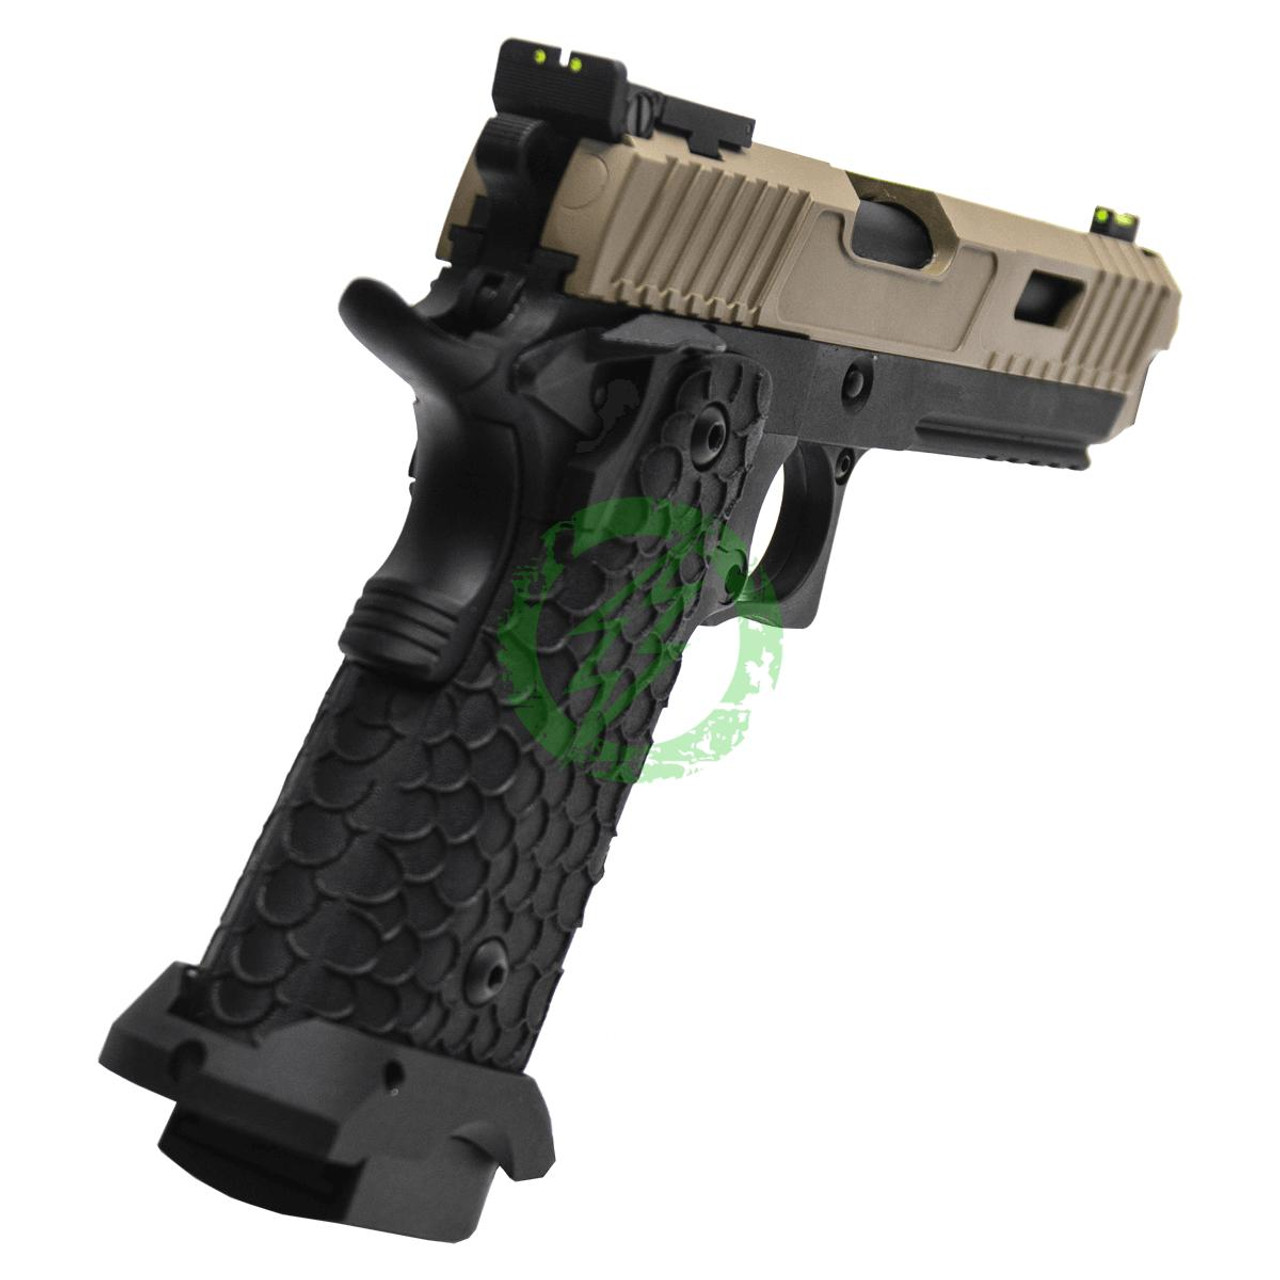  Valken BY HICAPA CO2 Blowback Airsoft Pistol | Tan & Black 